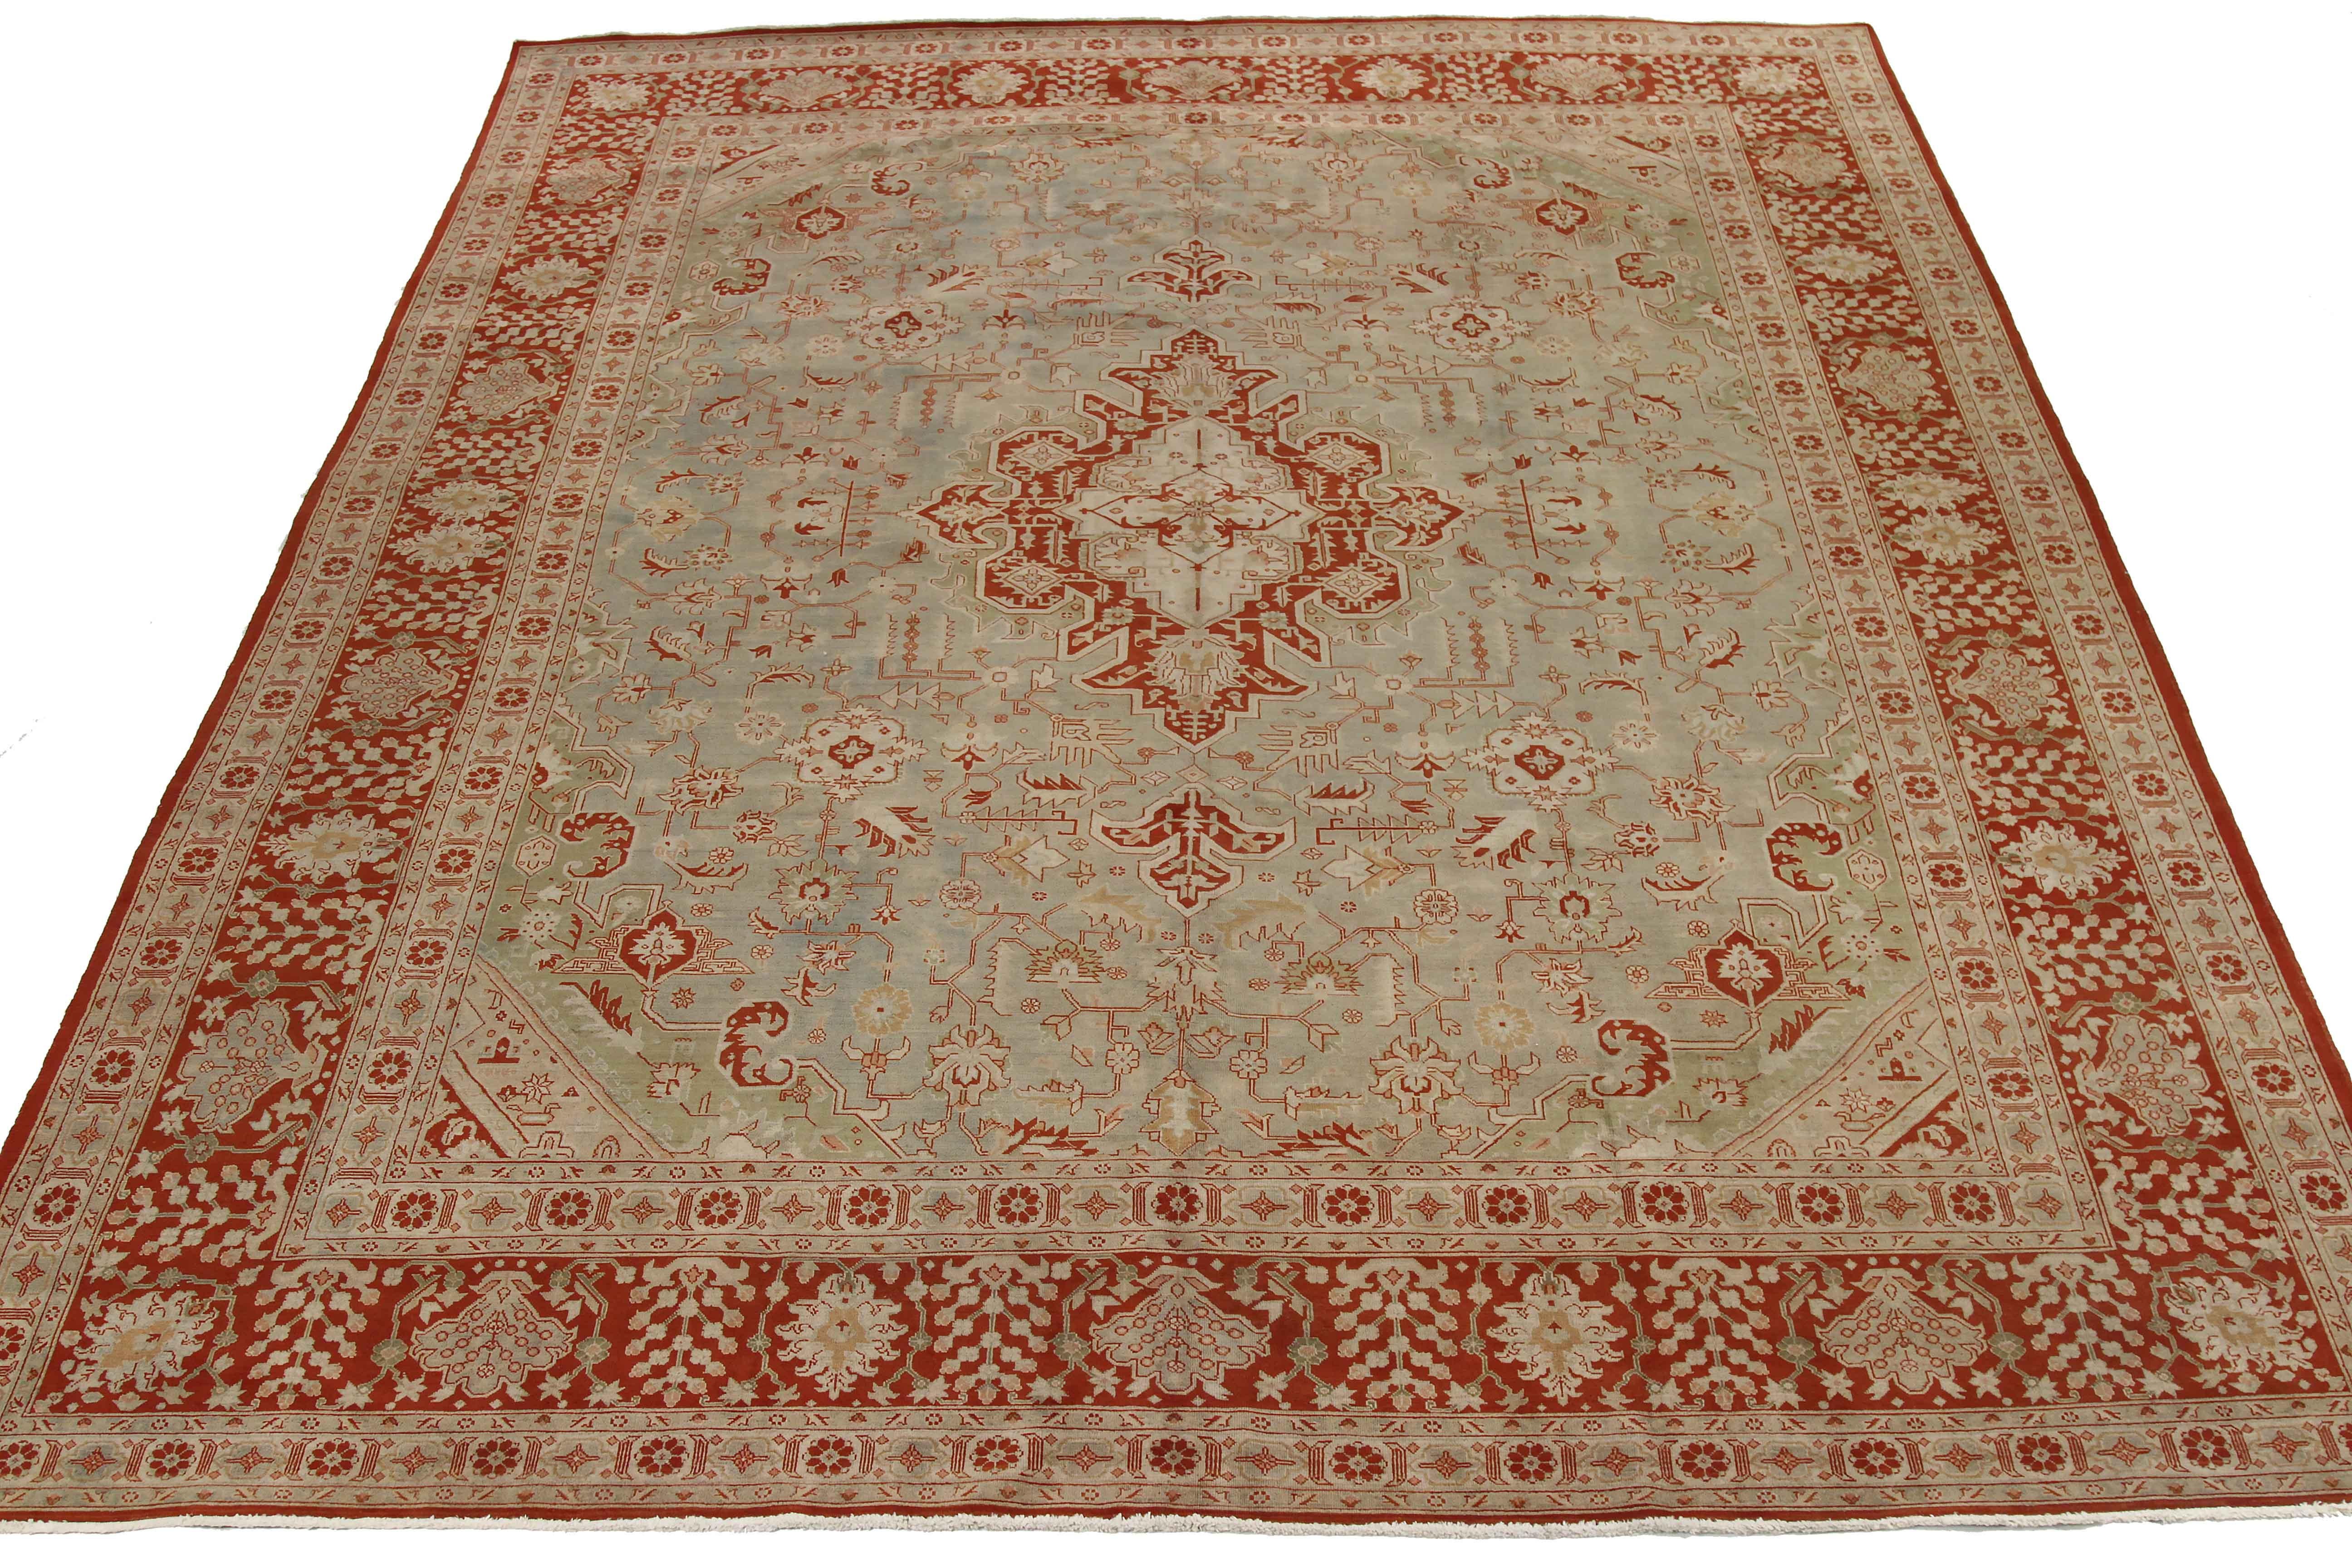 Antique Persian rug handwoven from the finest sheep’s wool and colored with all-natural vegetable dyes that are safe for humans and pets. It’s a traditional Tabriz weaving featuring a lovely ensemble of floral designs over a red and beige field.